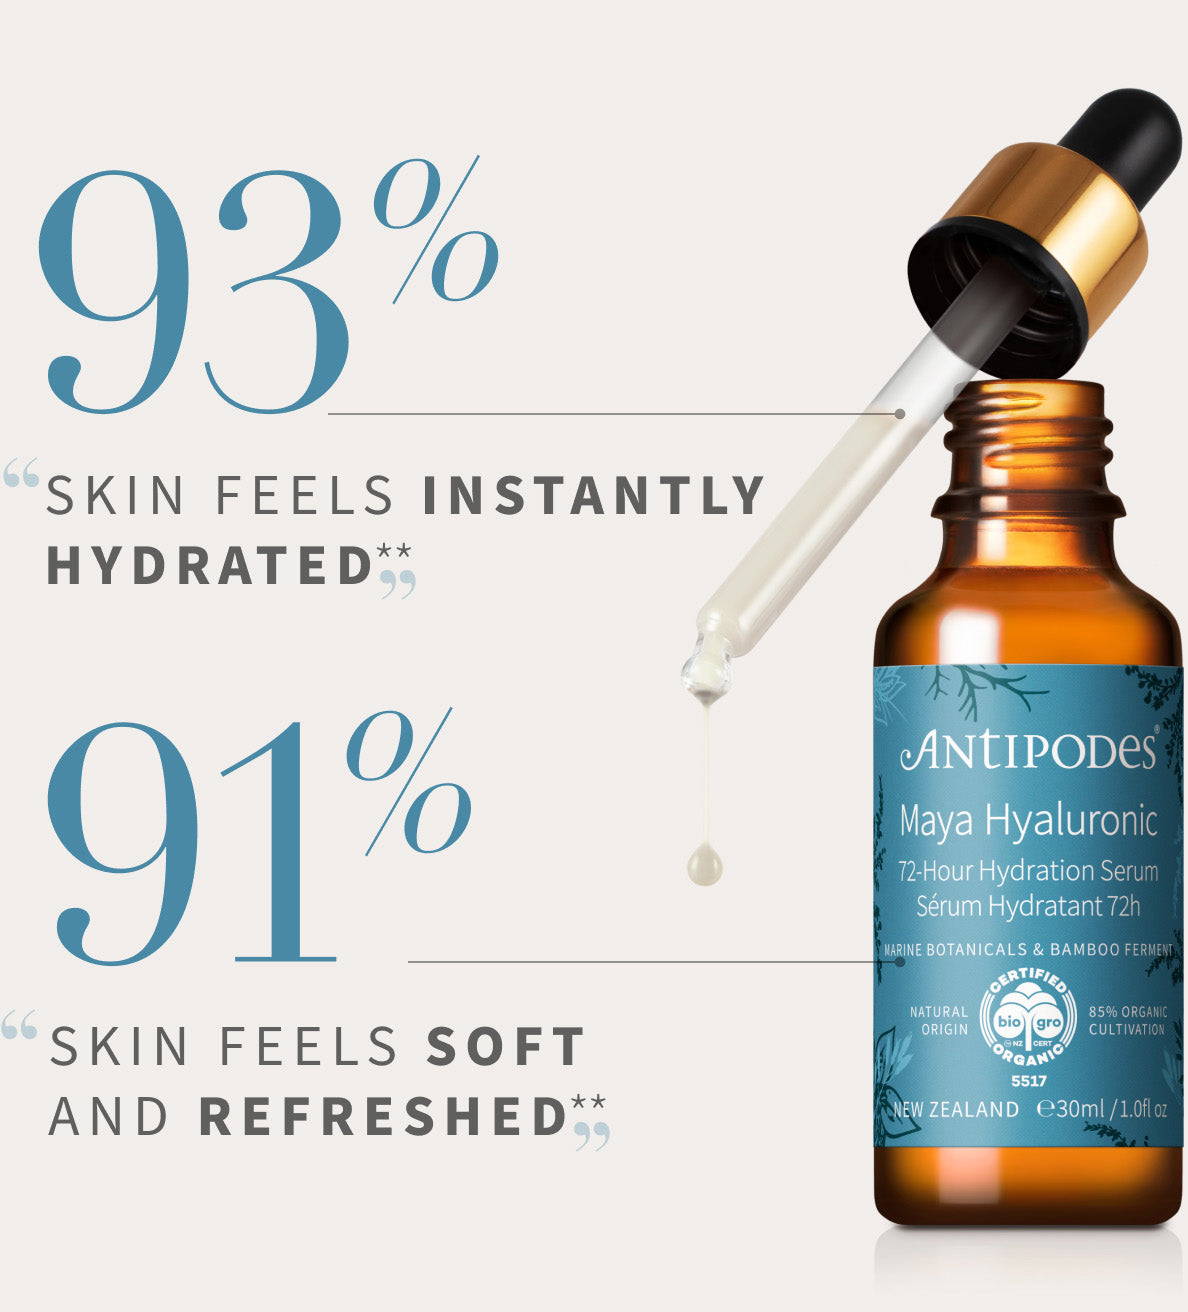 93% said skin feels instantly hydrated. 91% said skin feels soft and refreshed.